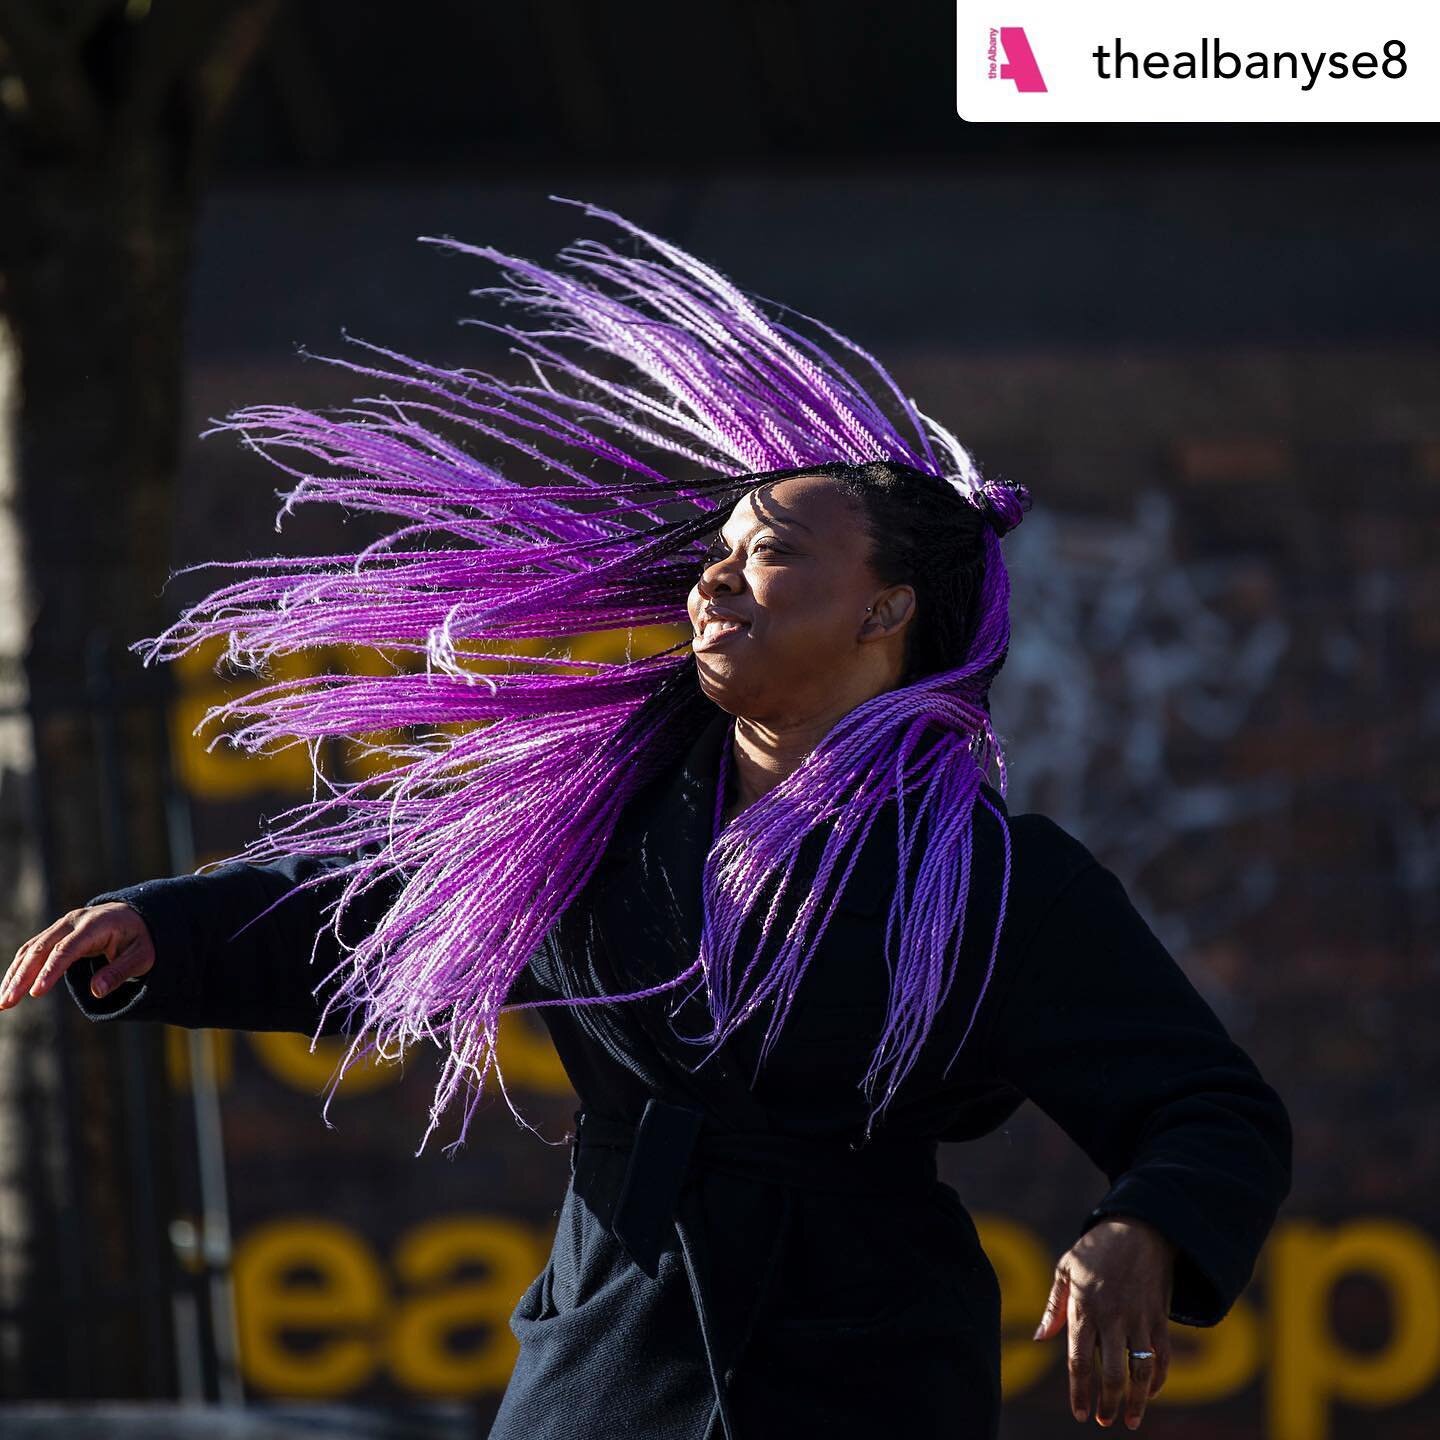 These are just some of the gorgeous photographs taken by @jemimayong for #youheardus in Deptford in partnership with @thealbanyse8 .

You Heard Us is a public art project celebrating women taking up public space. Swipe to see some of the photos in si